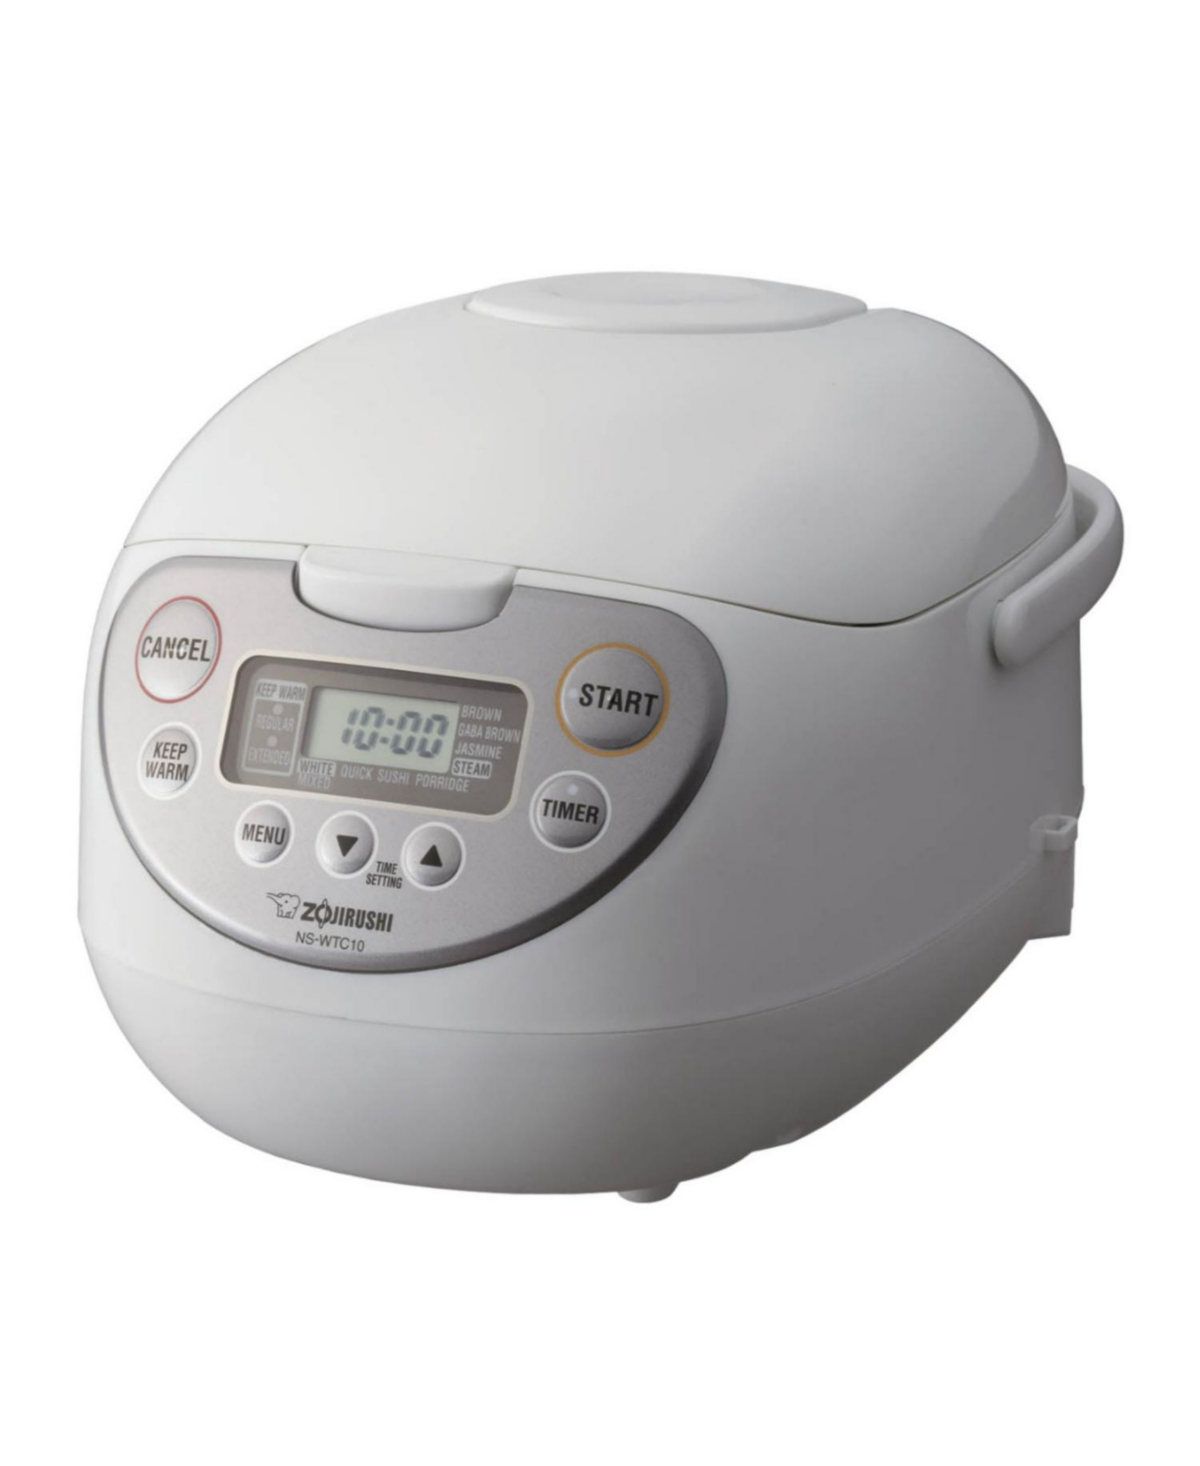 5.5-Cup Micom Rice Cooker and Warmer (1 Liter, White) - White